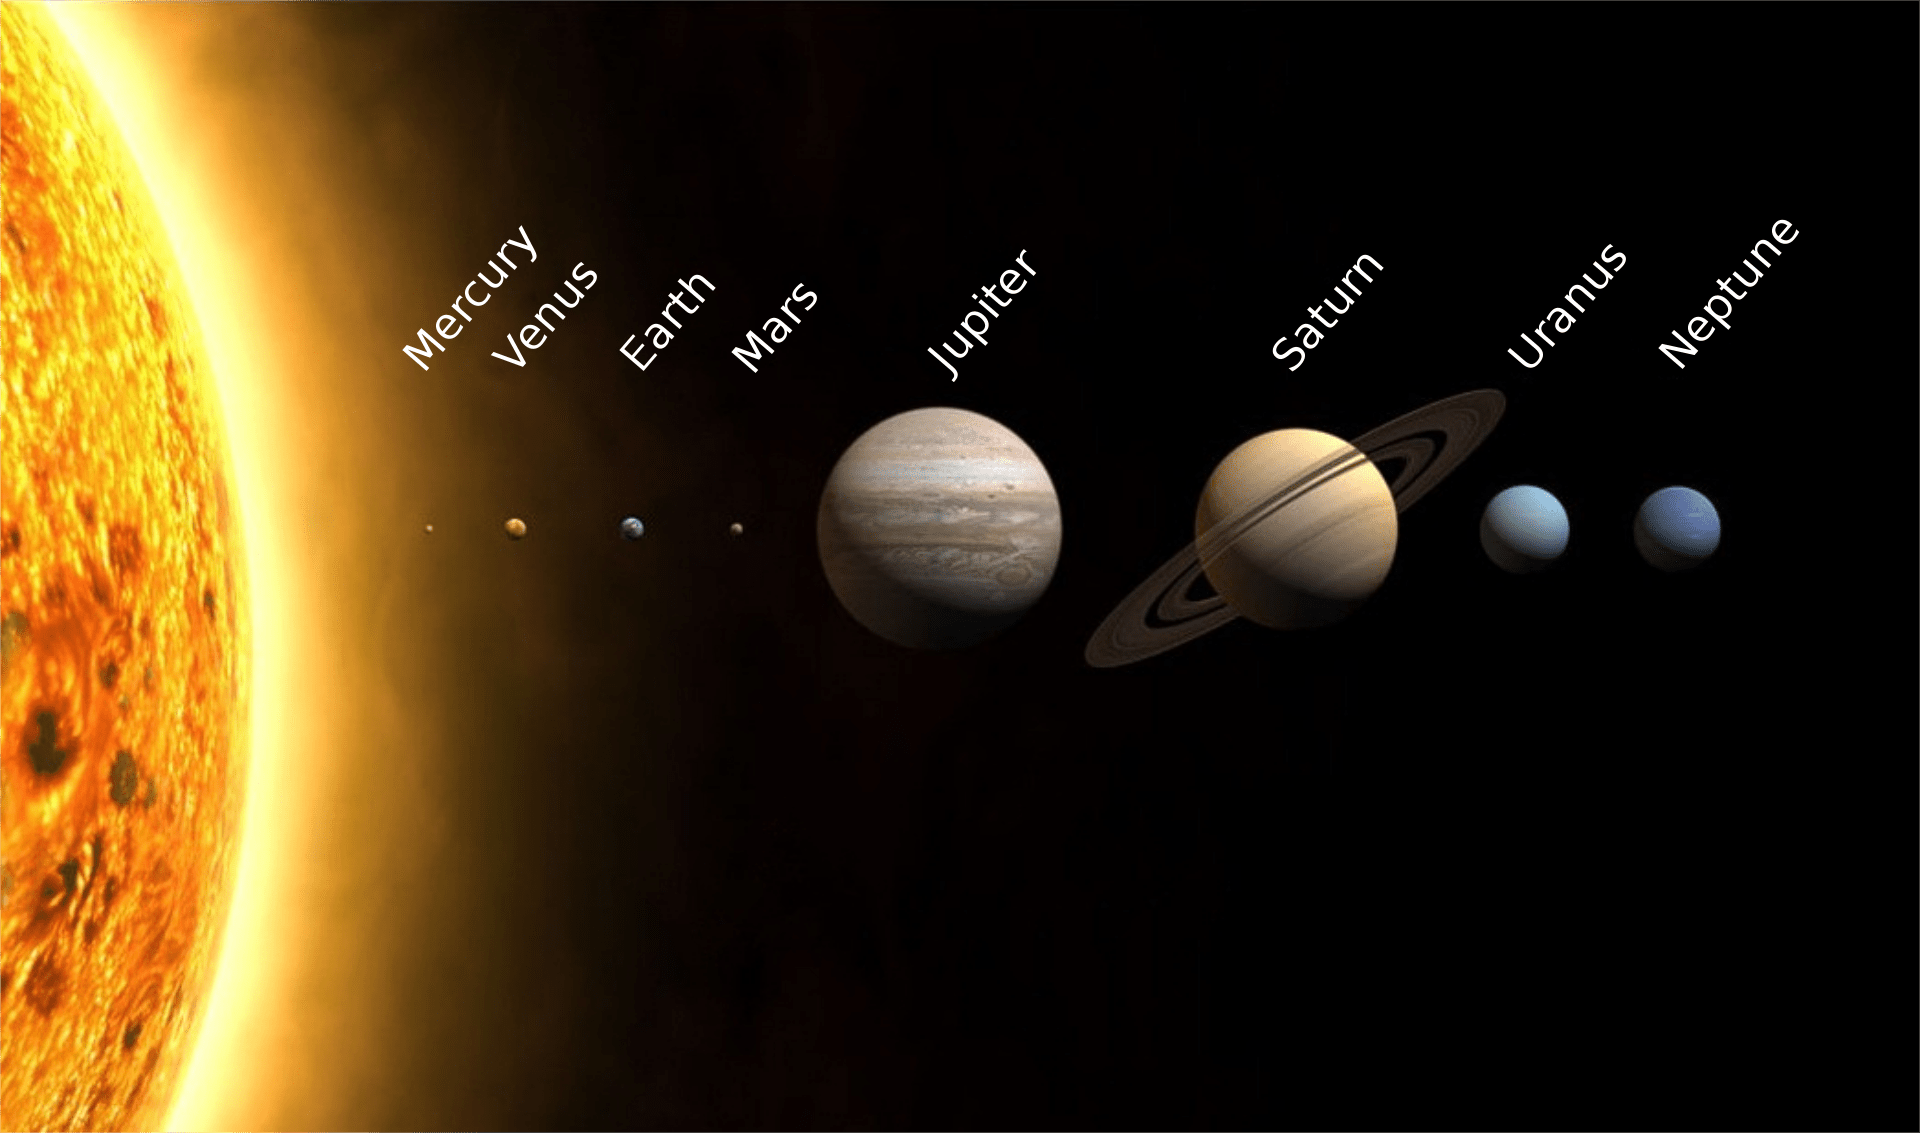 Sun and the 8 planets in the Solar System